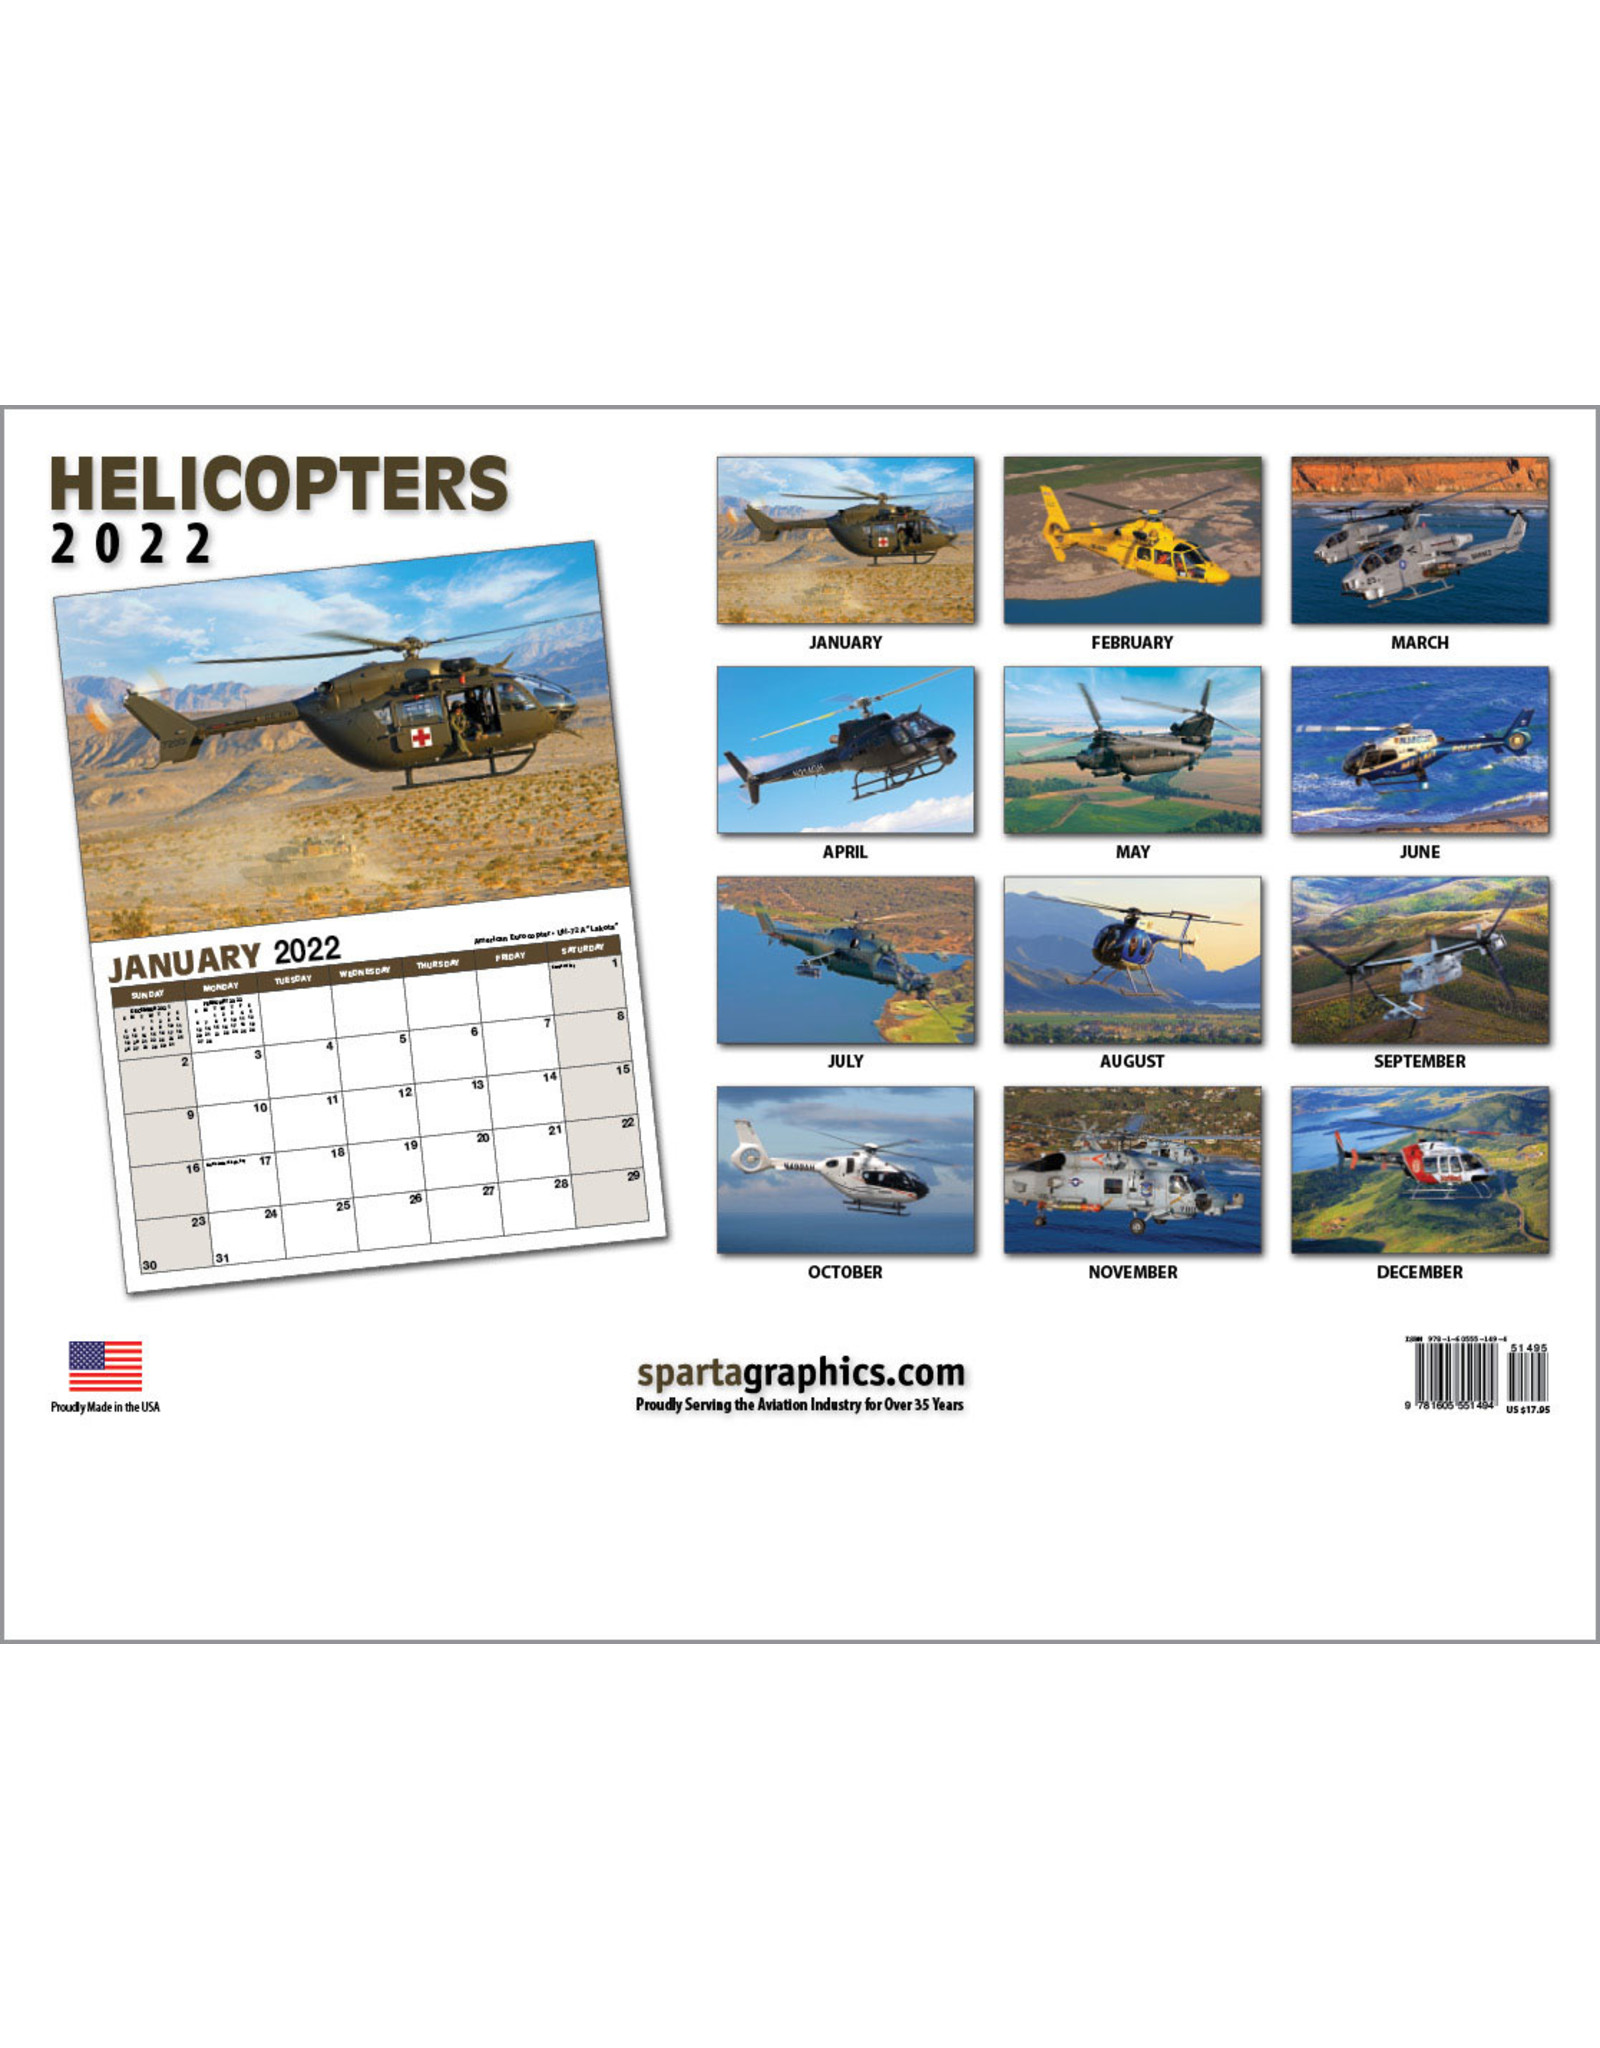 Sparta Calendar 2022 Helicopters